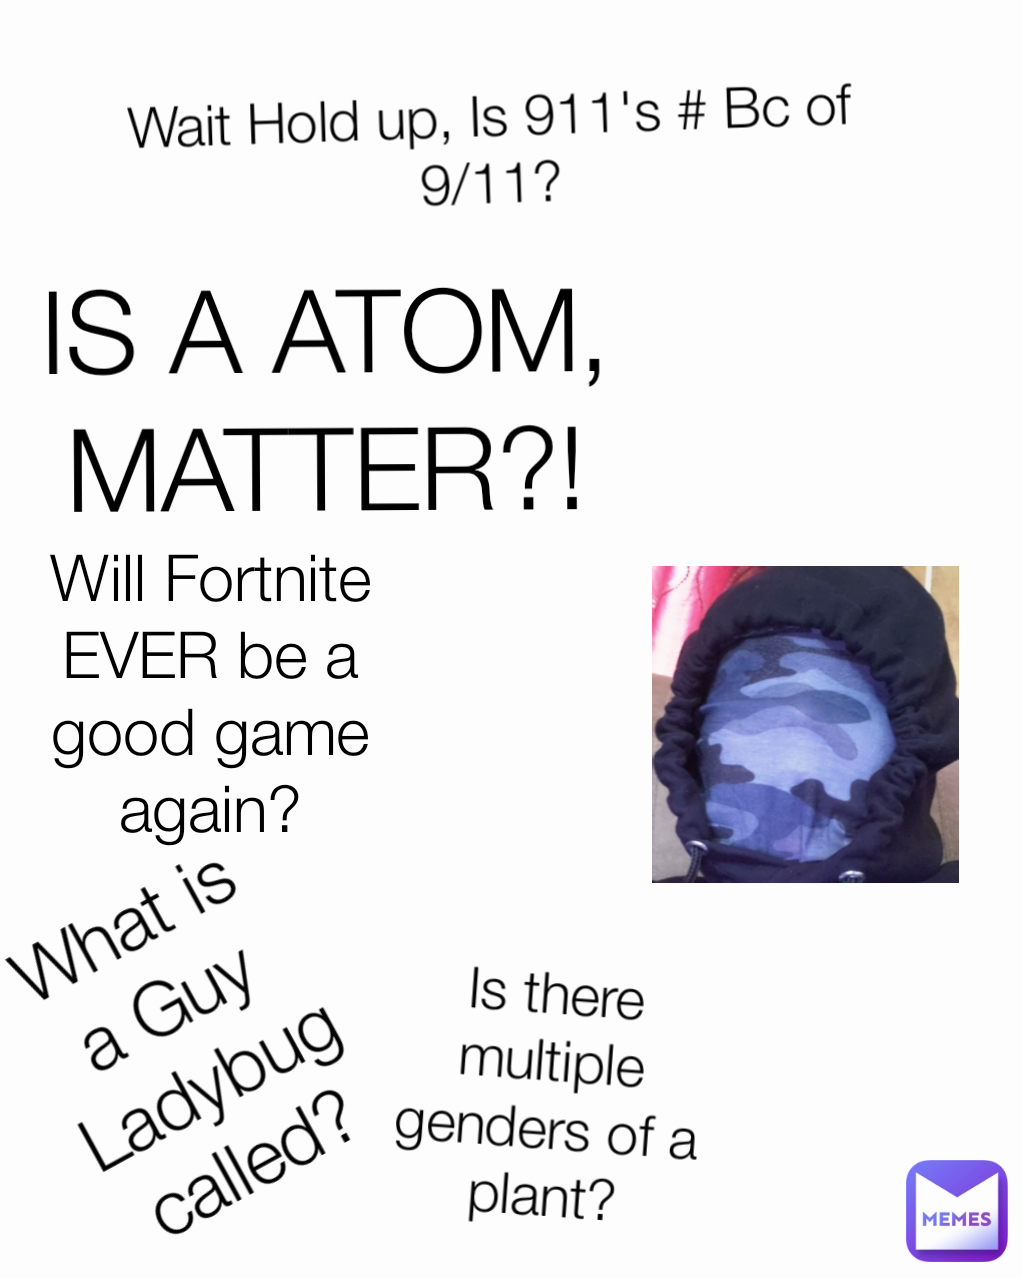 IS A ATOM, MATTER?! What is a Guy Ladybug called? Will Fortnite EVER be a good game again? Wait Hold up, Is 911's # Bc of 9/11? Is there multiple genders of a plant?